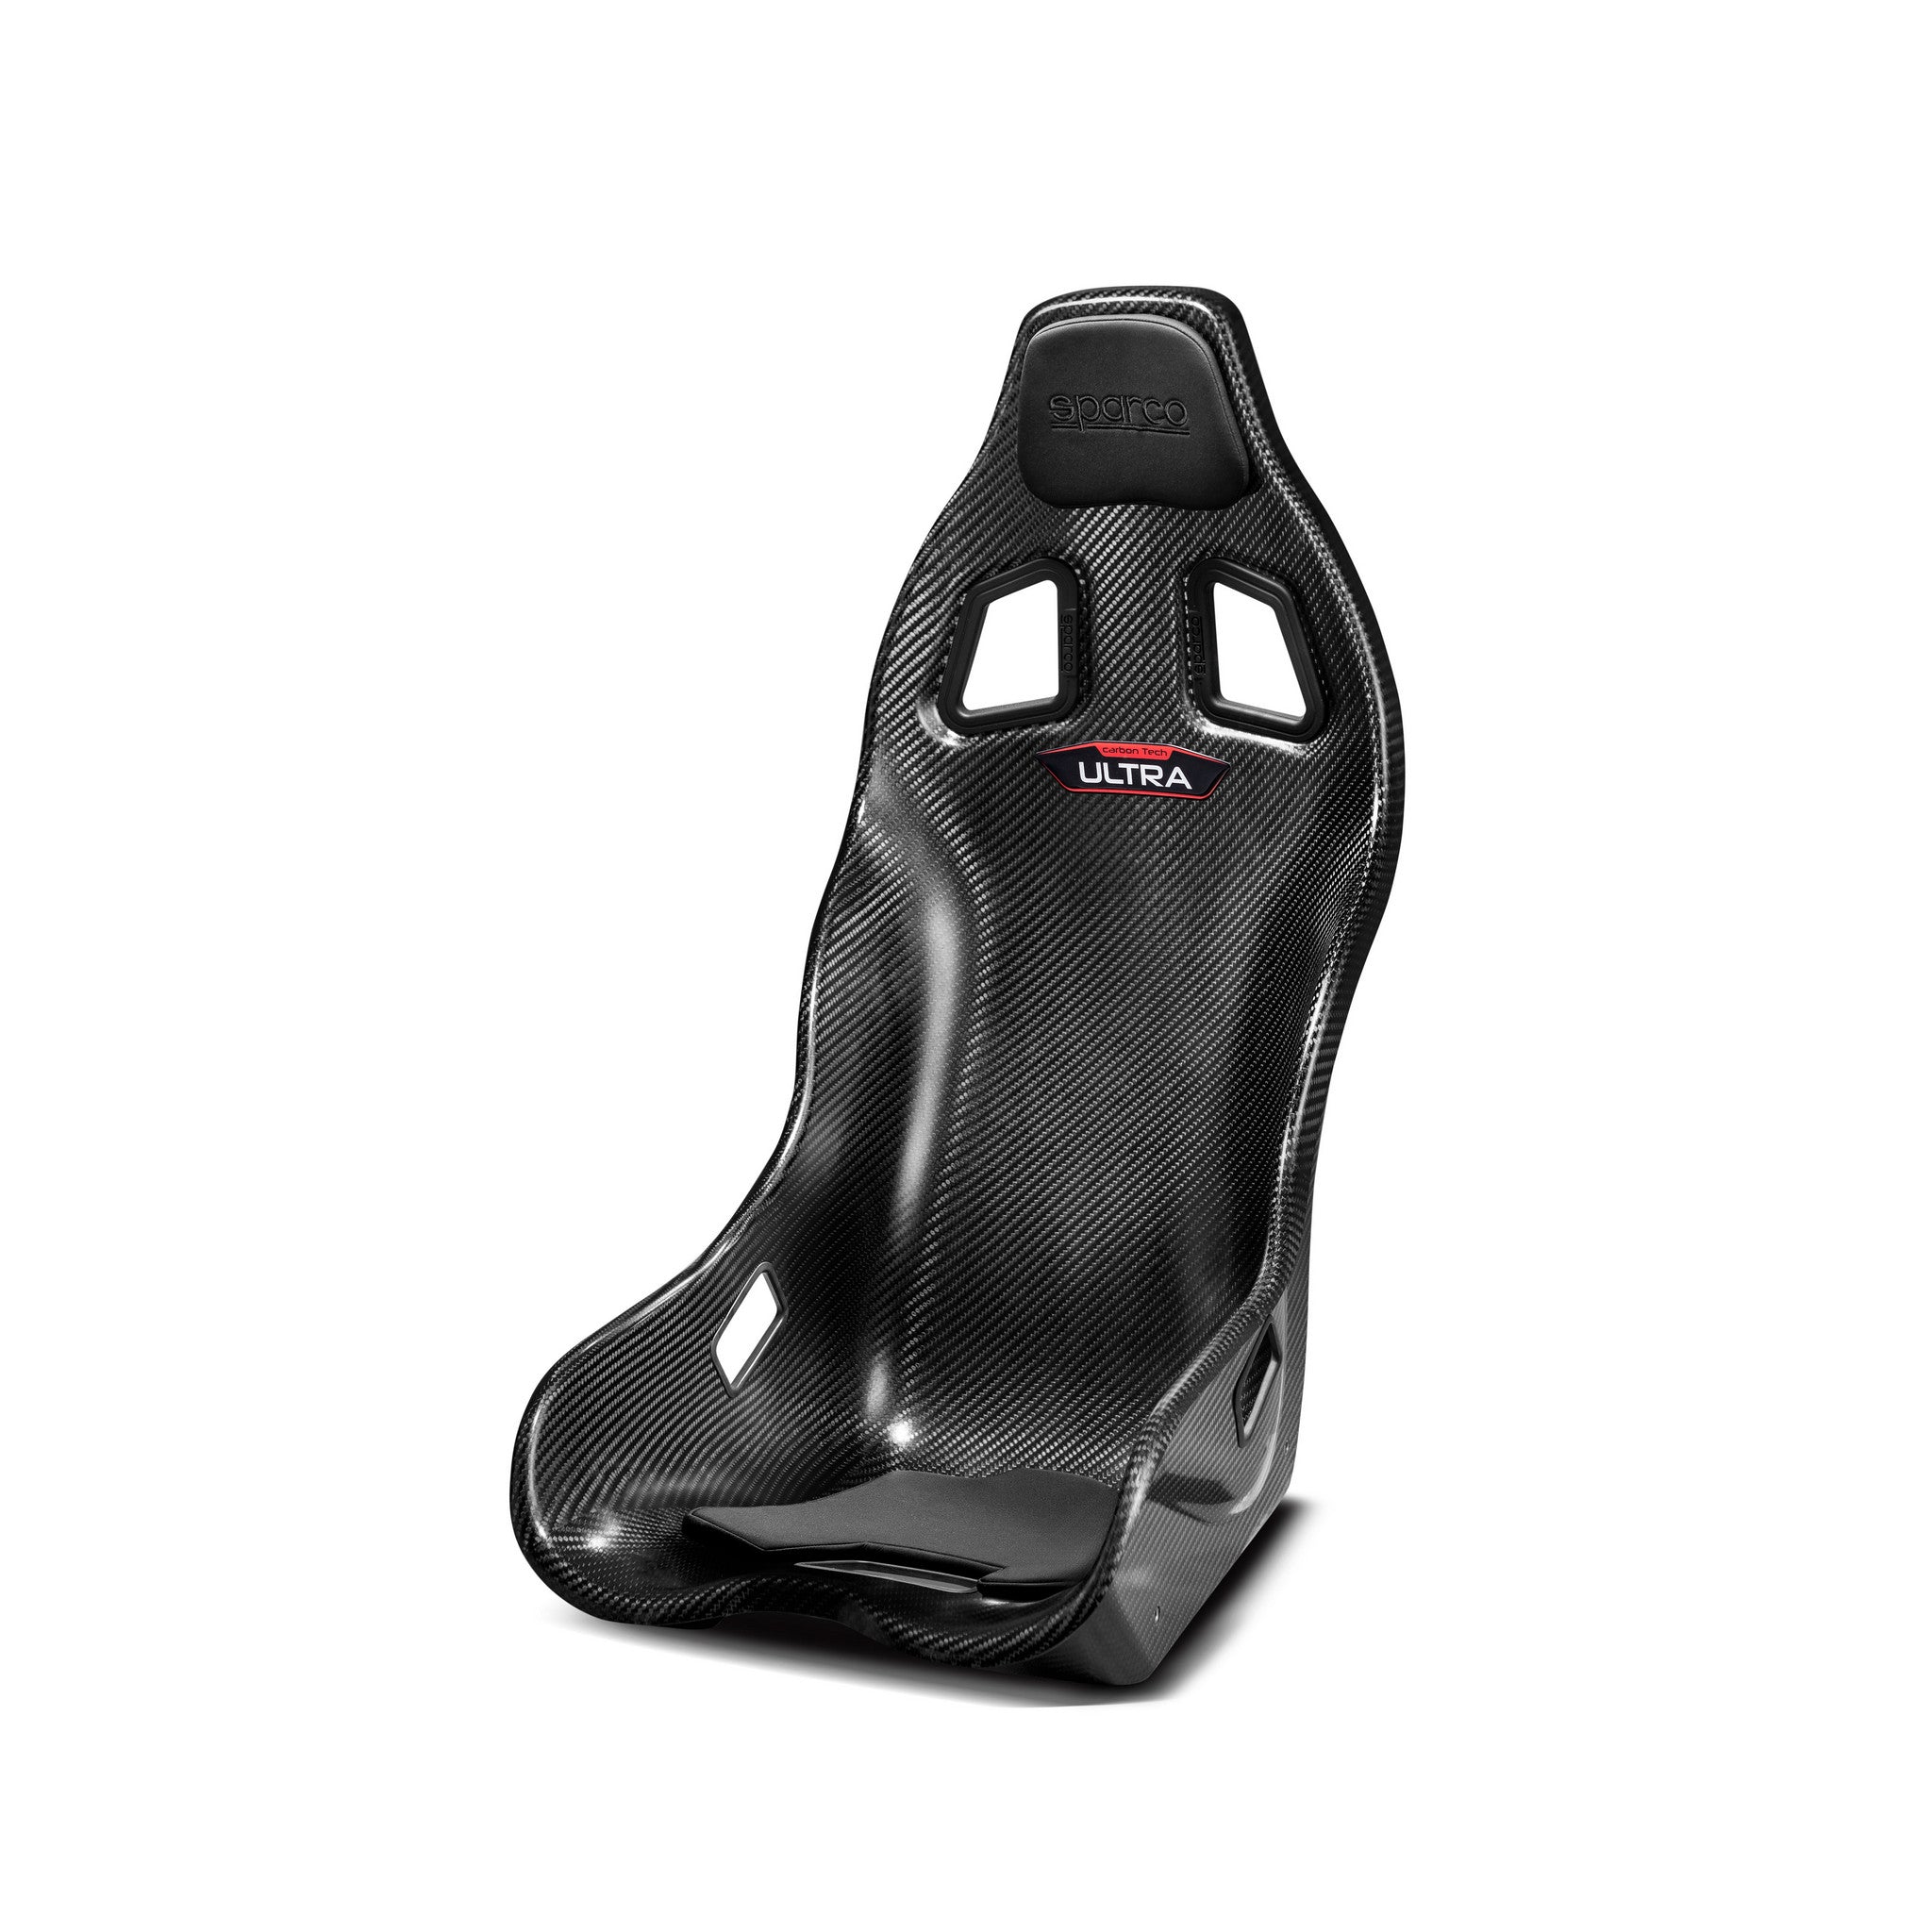 HEAD PAD ULTRA SEAT FABRIC - Sparco Shop